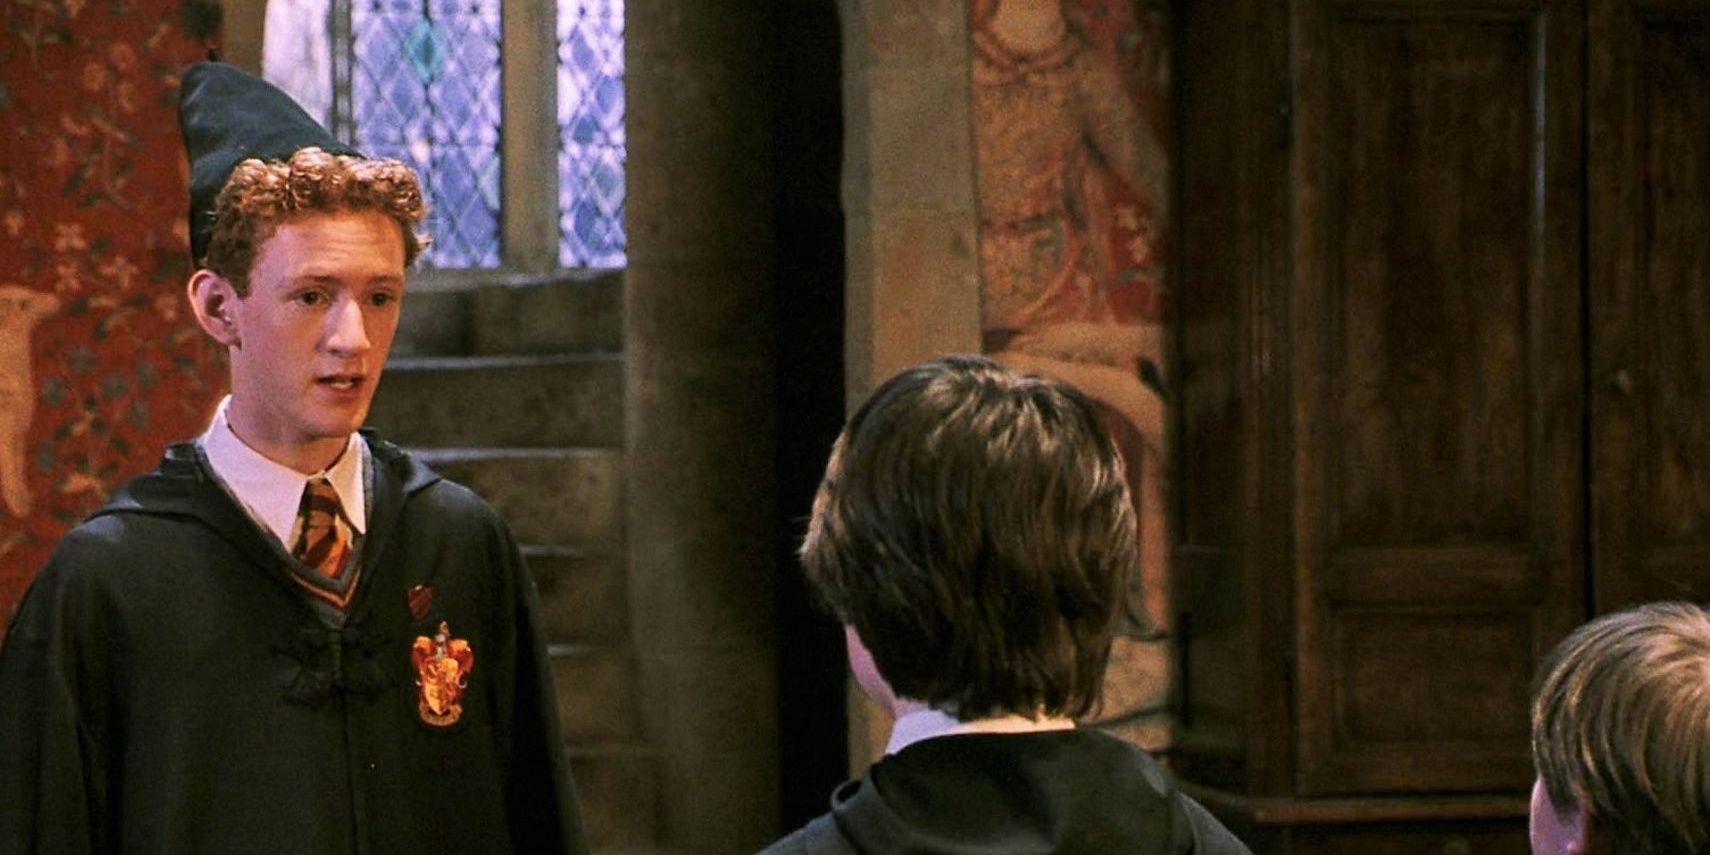 Percy Weasley gives instructions to First-Years